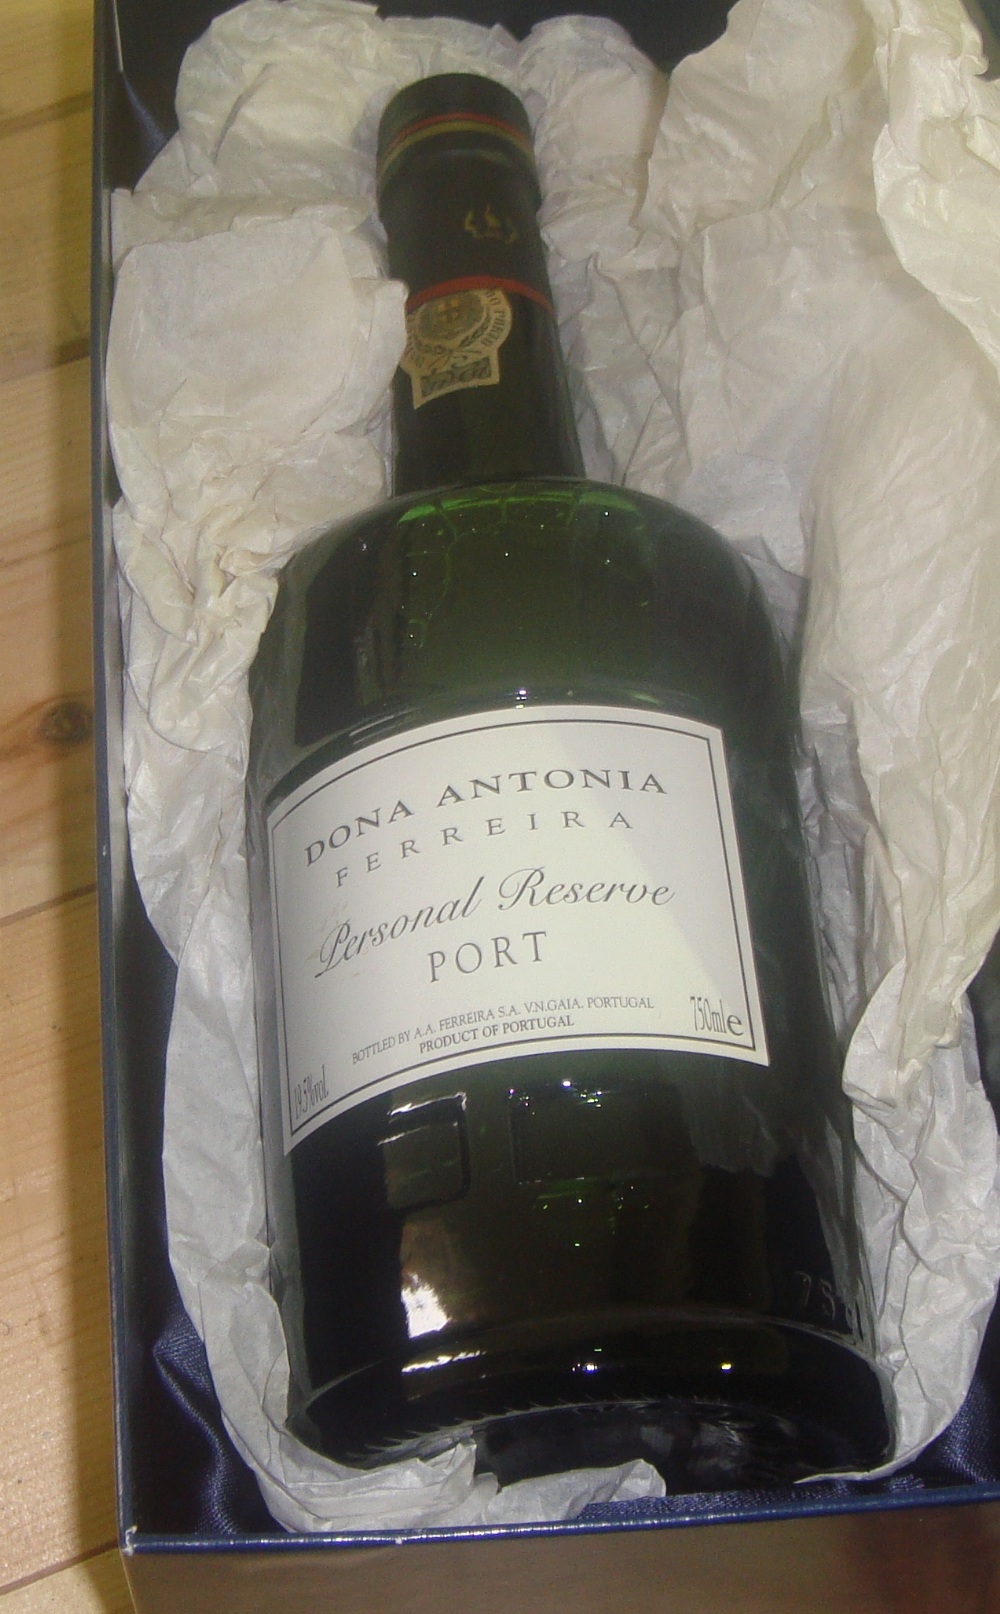 Commerorative bottle of port for HMY Brittania in box and a large blue and white plate